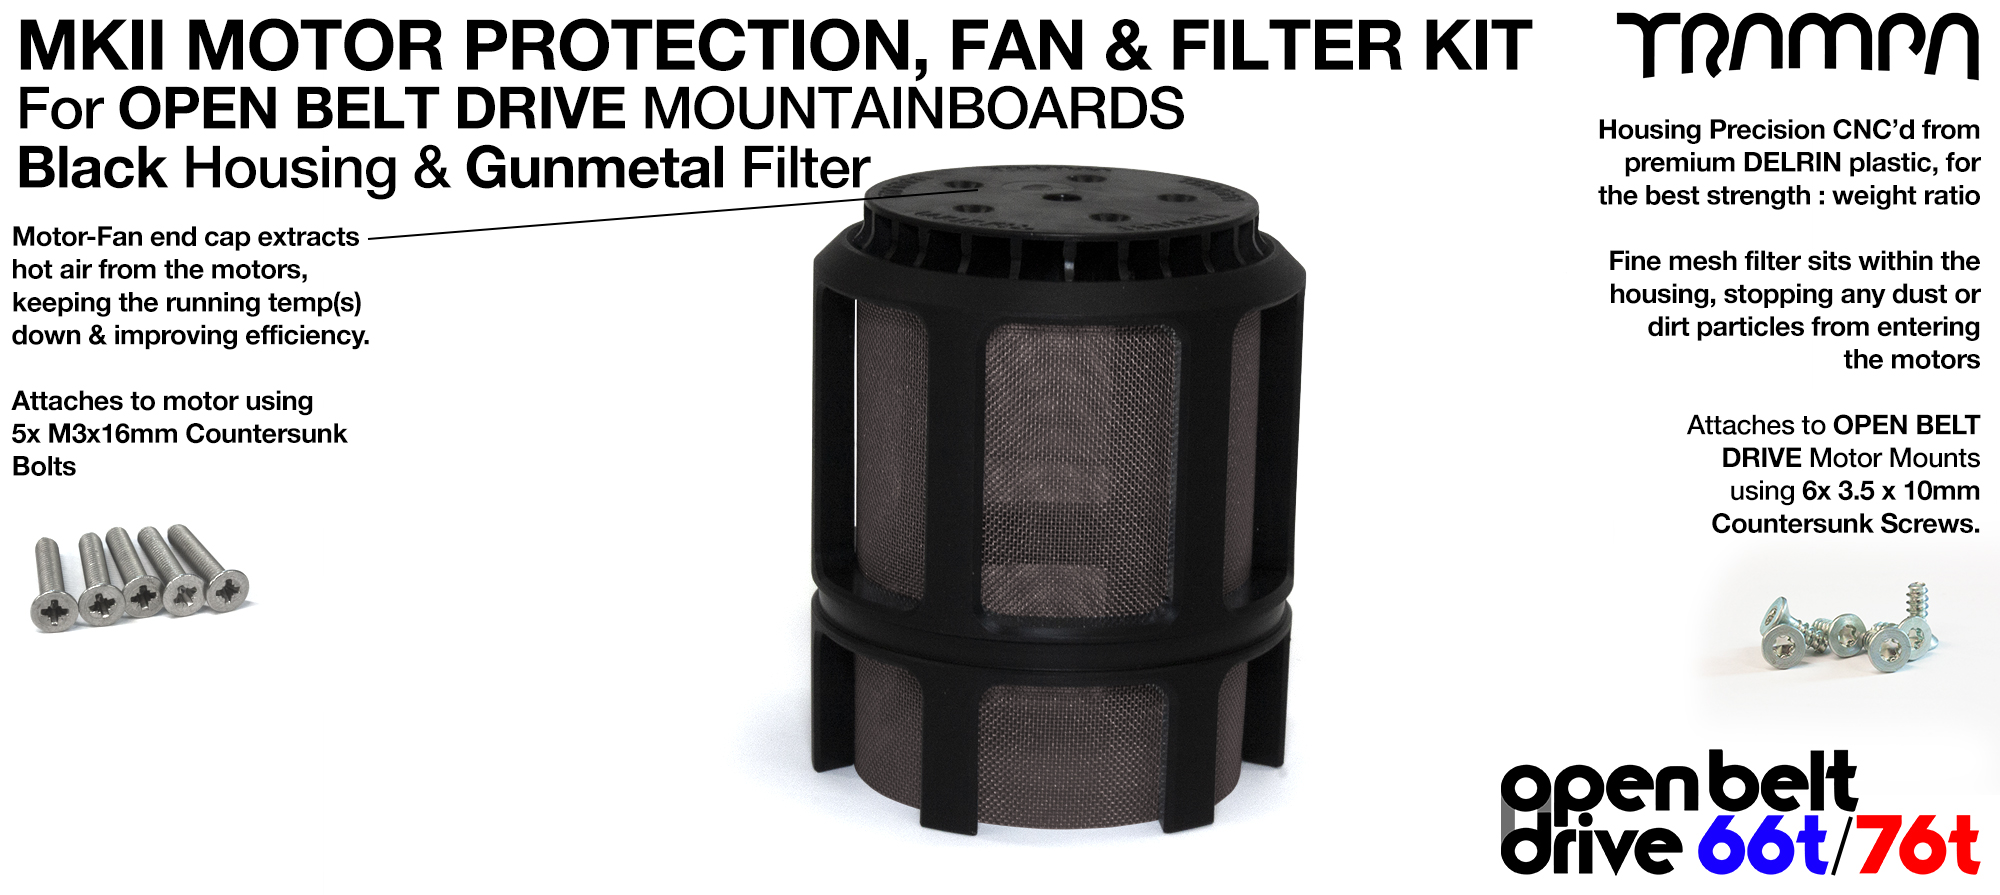 FULL CAGE Motor protection SUPER STRONG DELRIN Plastic includes Fan & GUNMETAL Filter - SINGLE